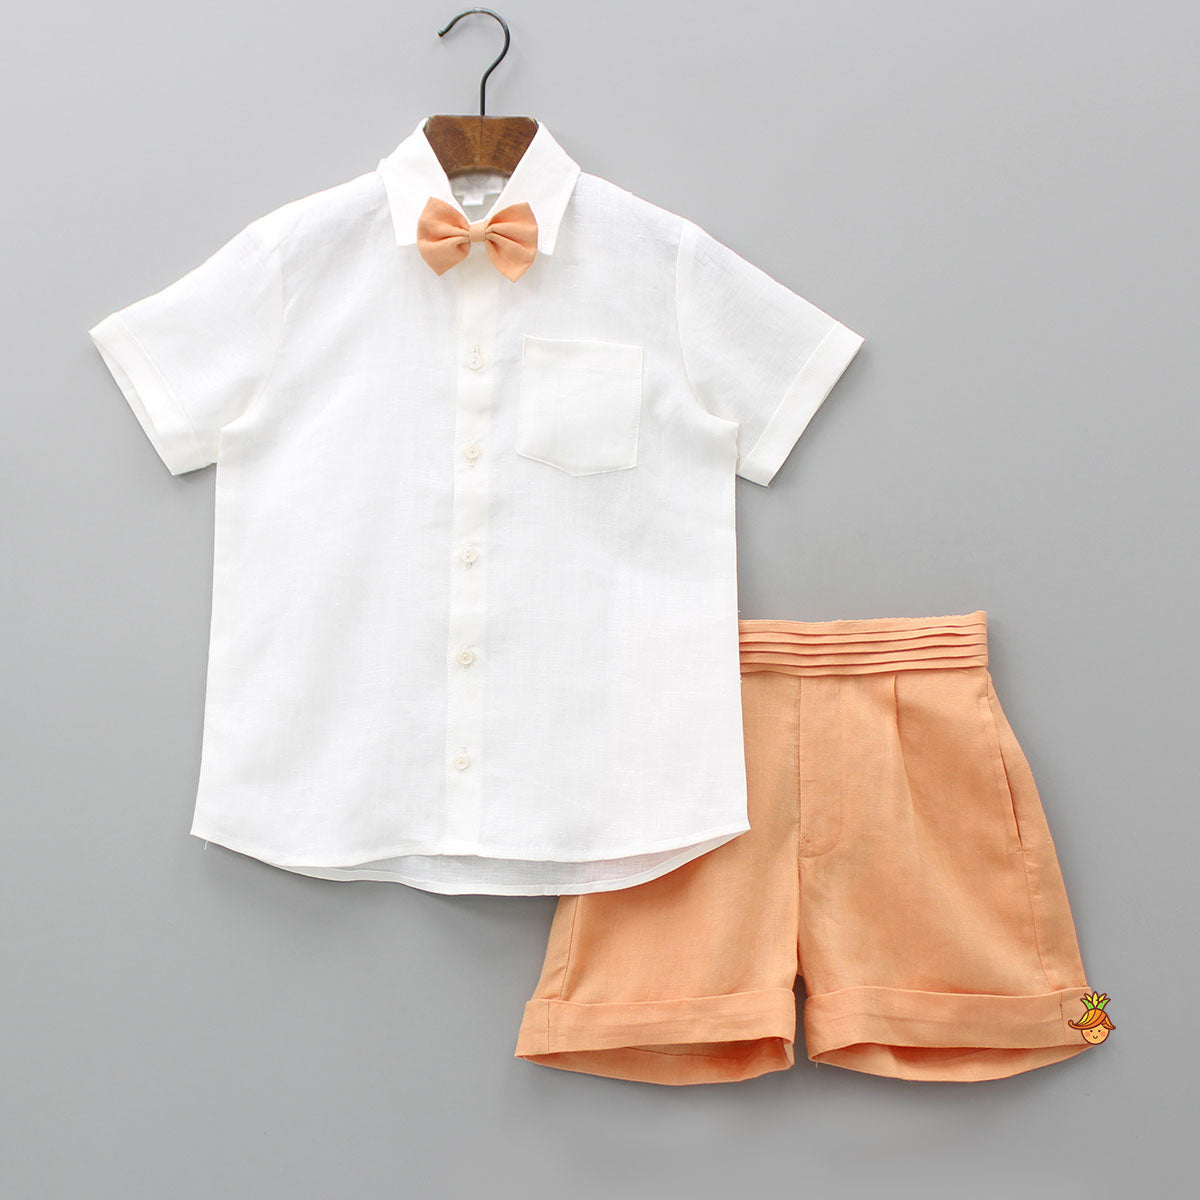 Patch Pocket Off White Shirt And Peach Shorts With Bow Tie